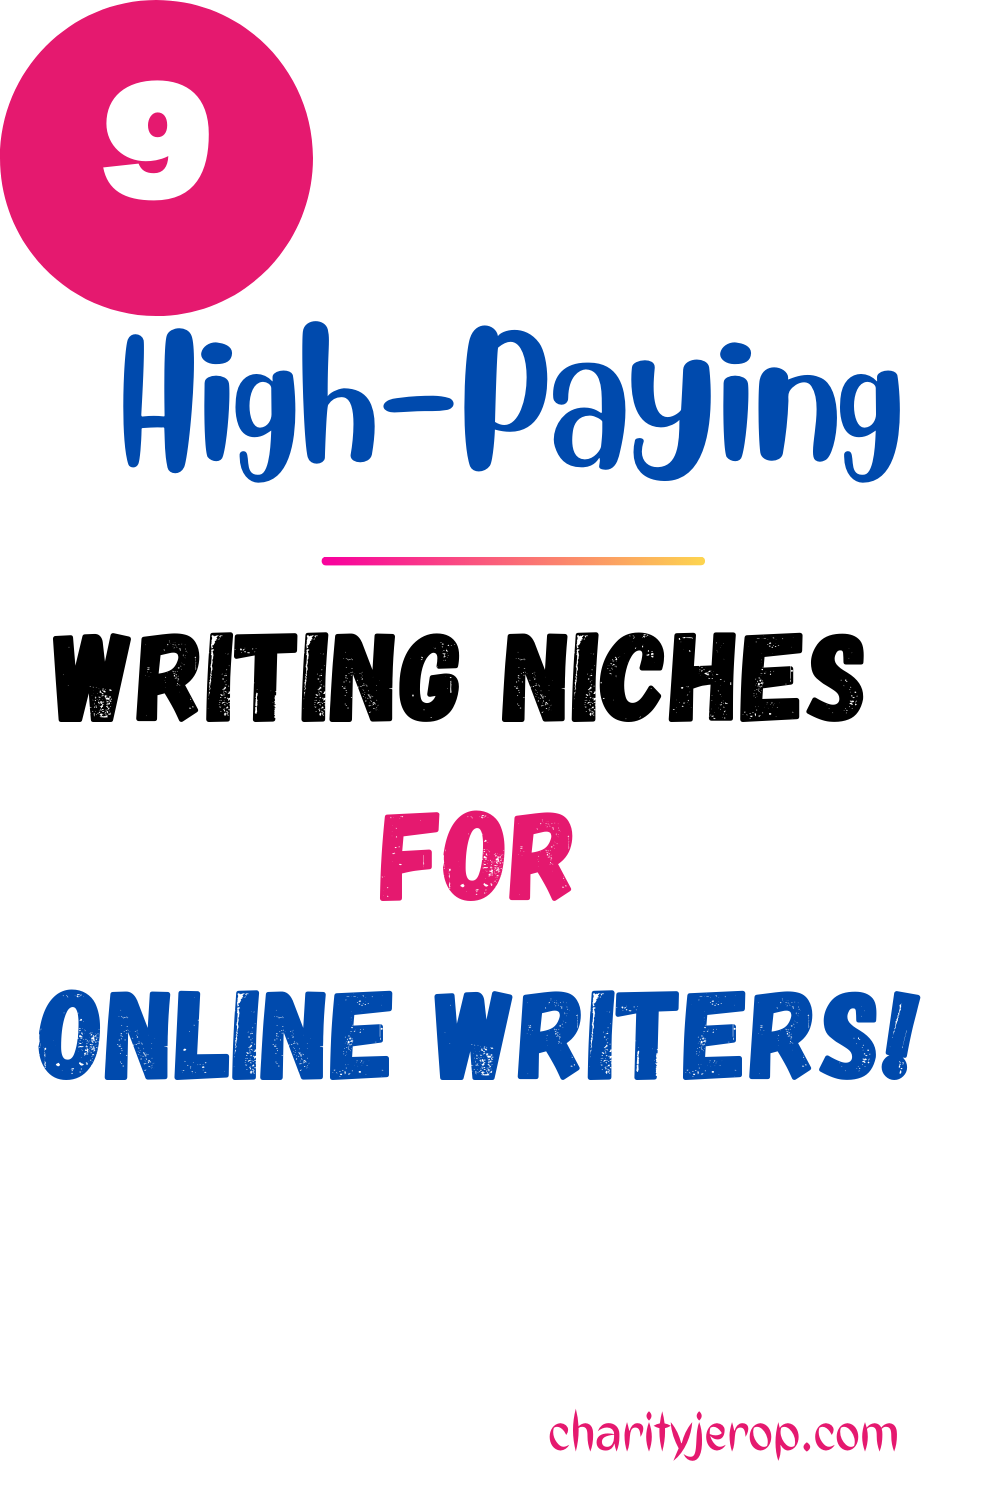 High-paying writing niches